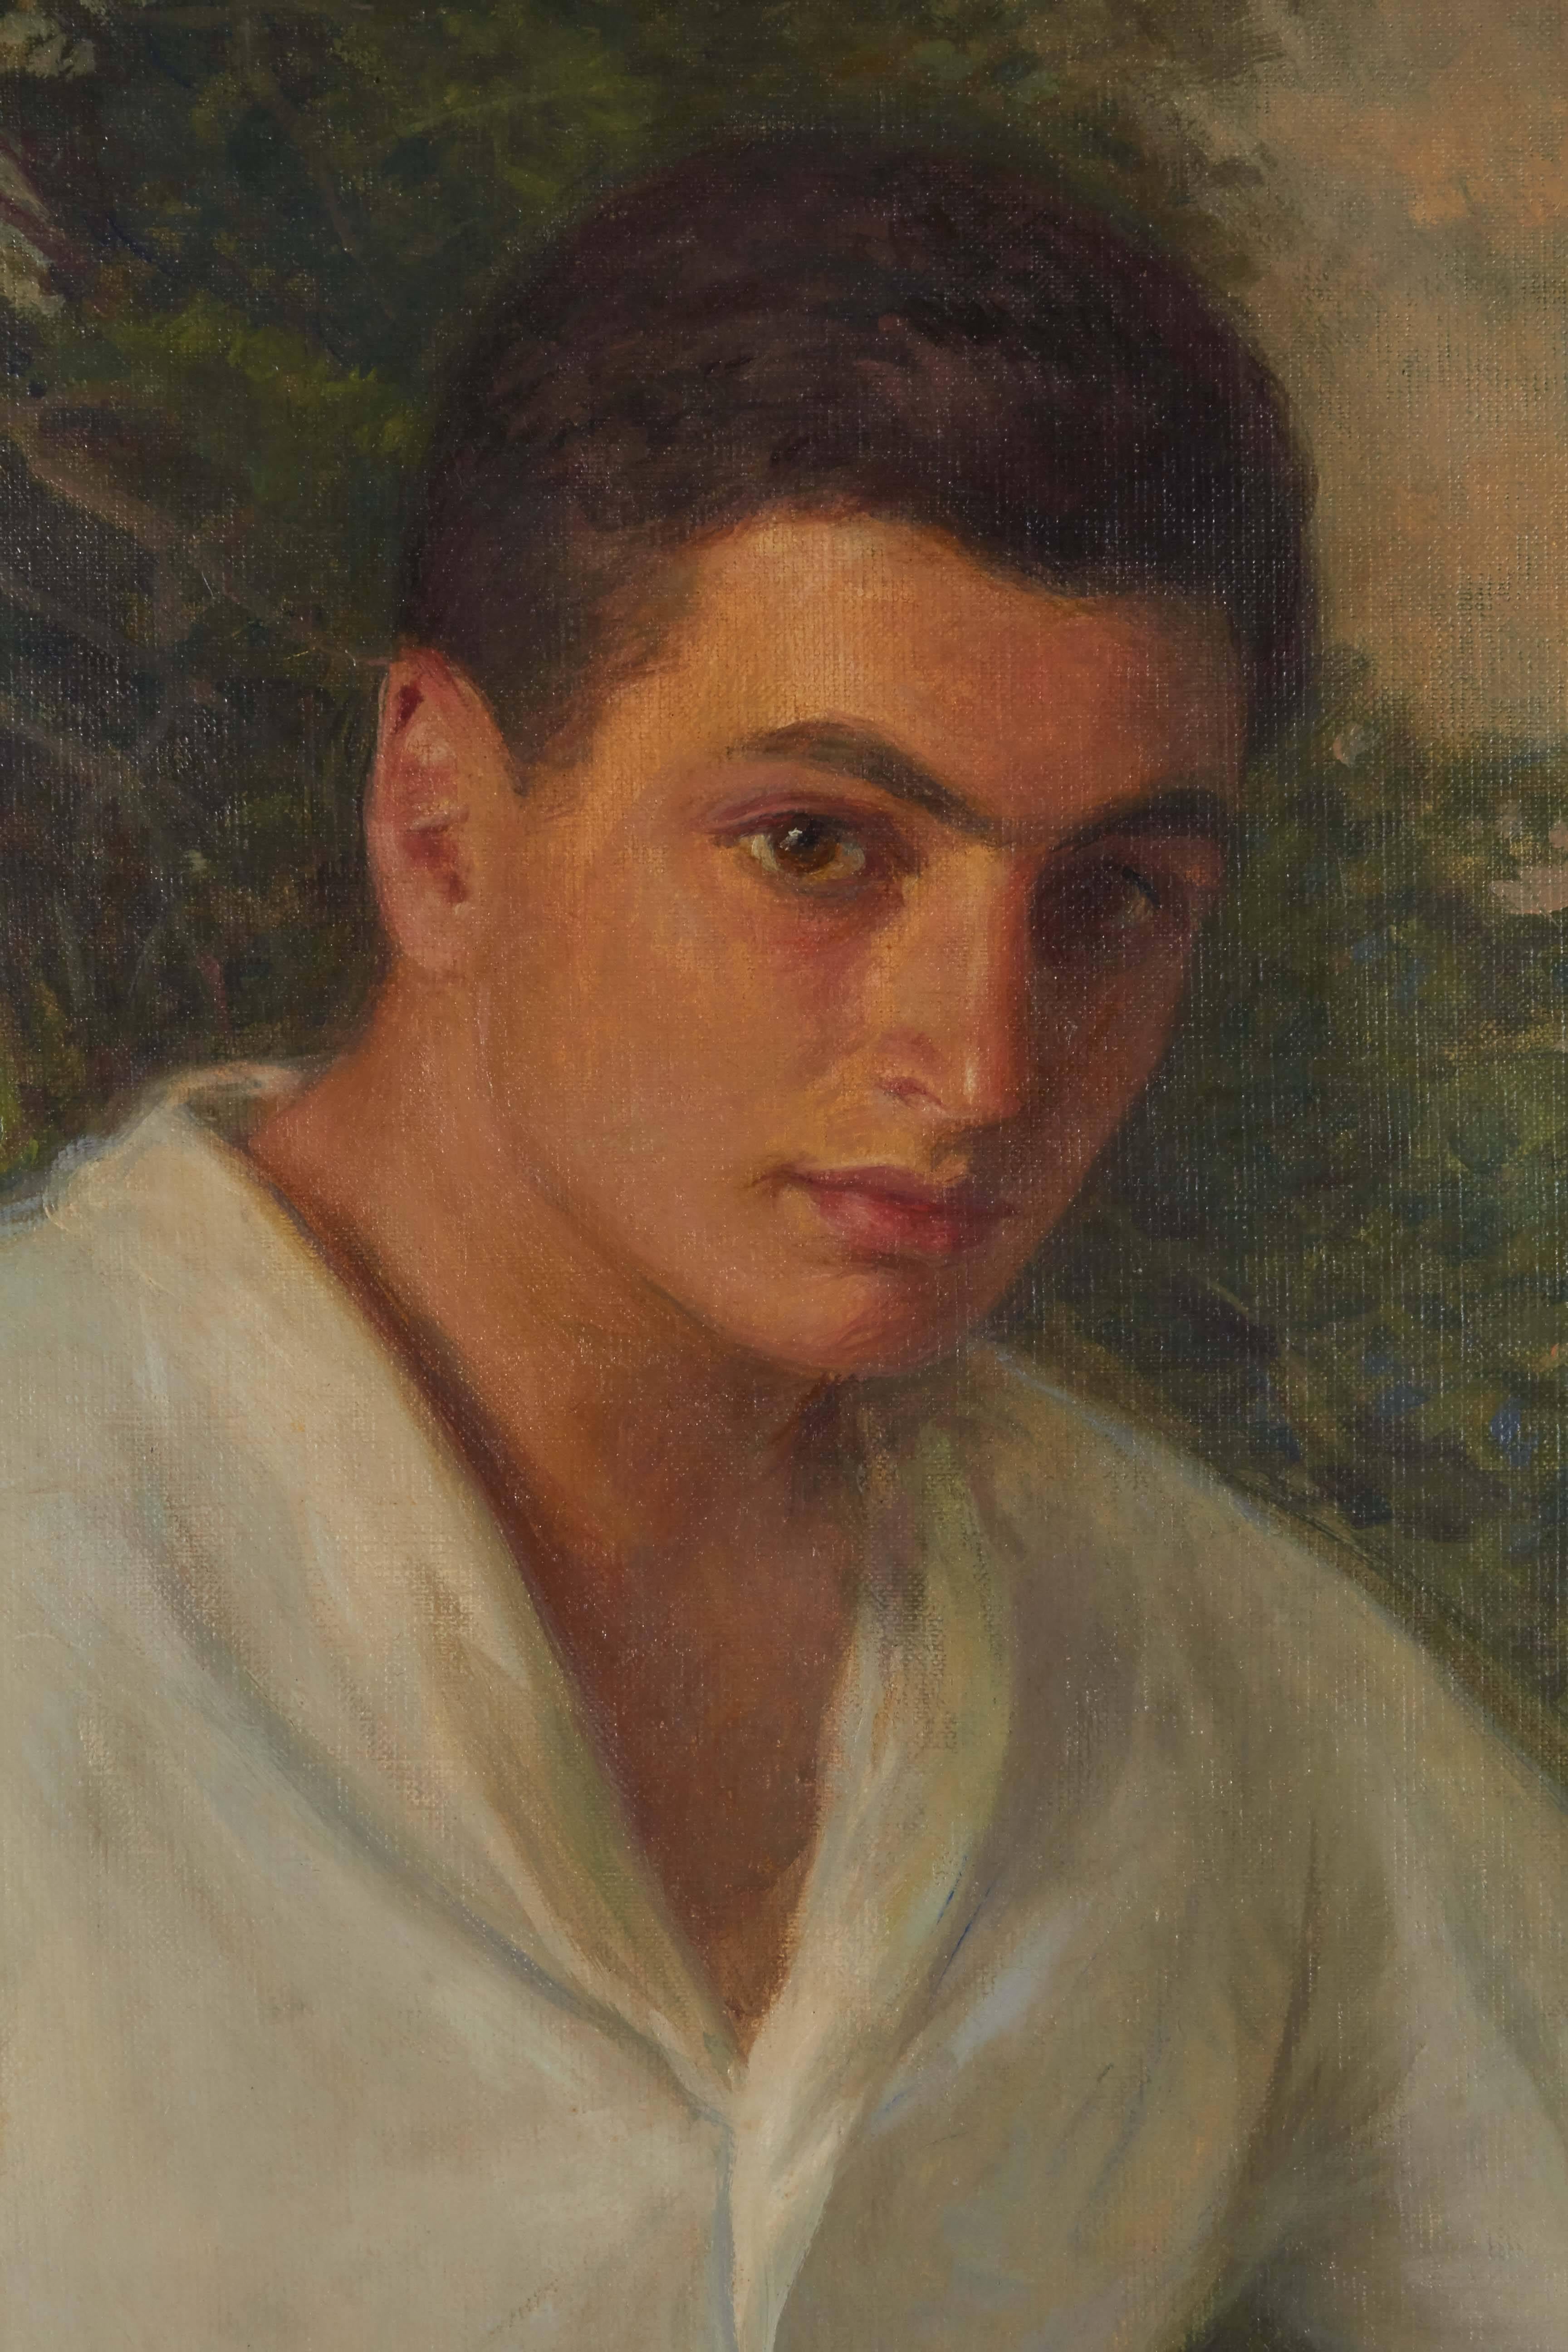 Albert Herter (American, 1871-1950)
Portrait of a young man in his Sunday finest
Signed 'Albert Herter' (lower left)
Oil on canvas
44 x 60¼ in. (111.8 x 153 cm).

Not available for sale or to ship in the state of California.